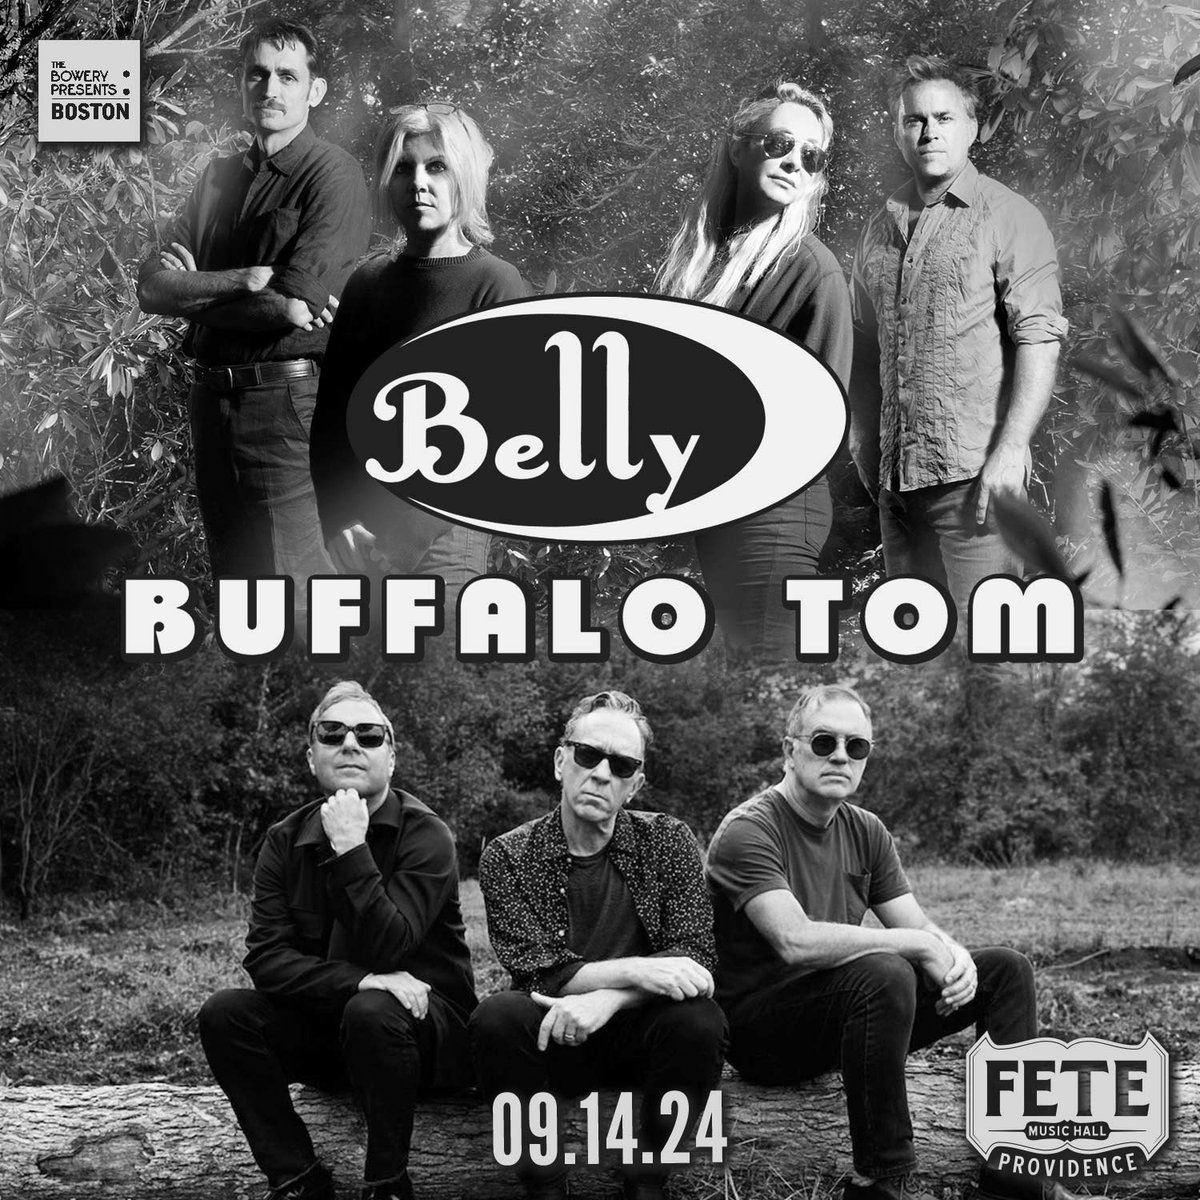 JUST ANNOUNCED! @bellytheband + @buffalotomband are coming to @fetemusic on Saturday, September 14 🙌 Tickets go on sale Friday at 10am // ticketweb.com/event/belly-bu…